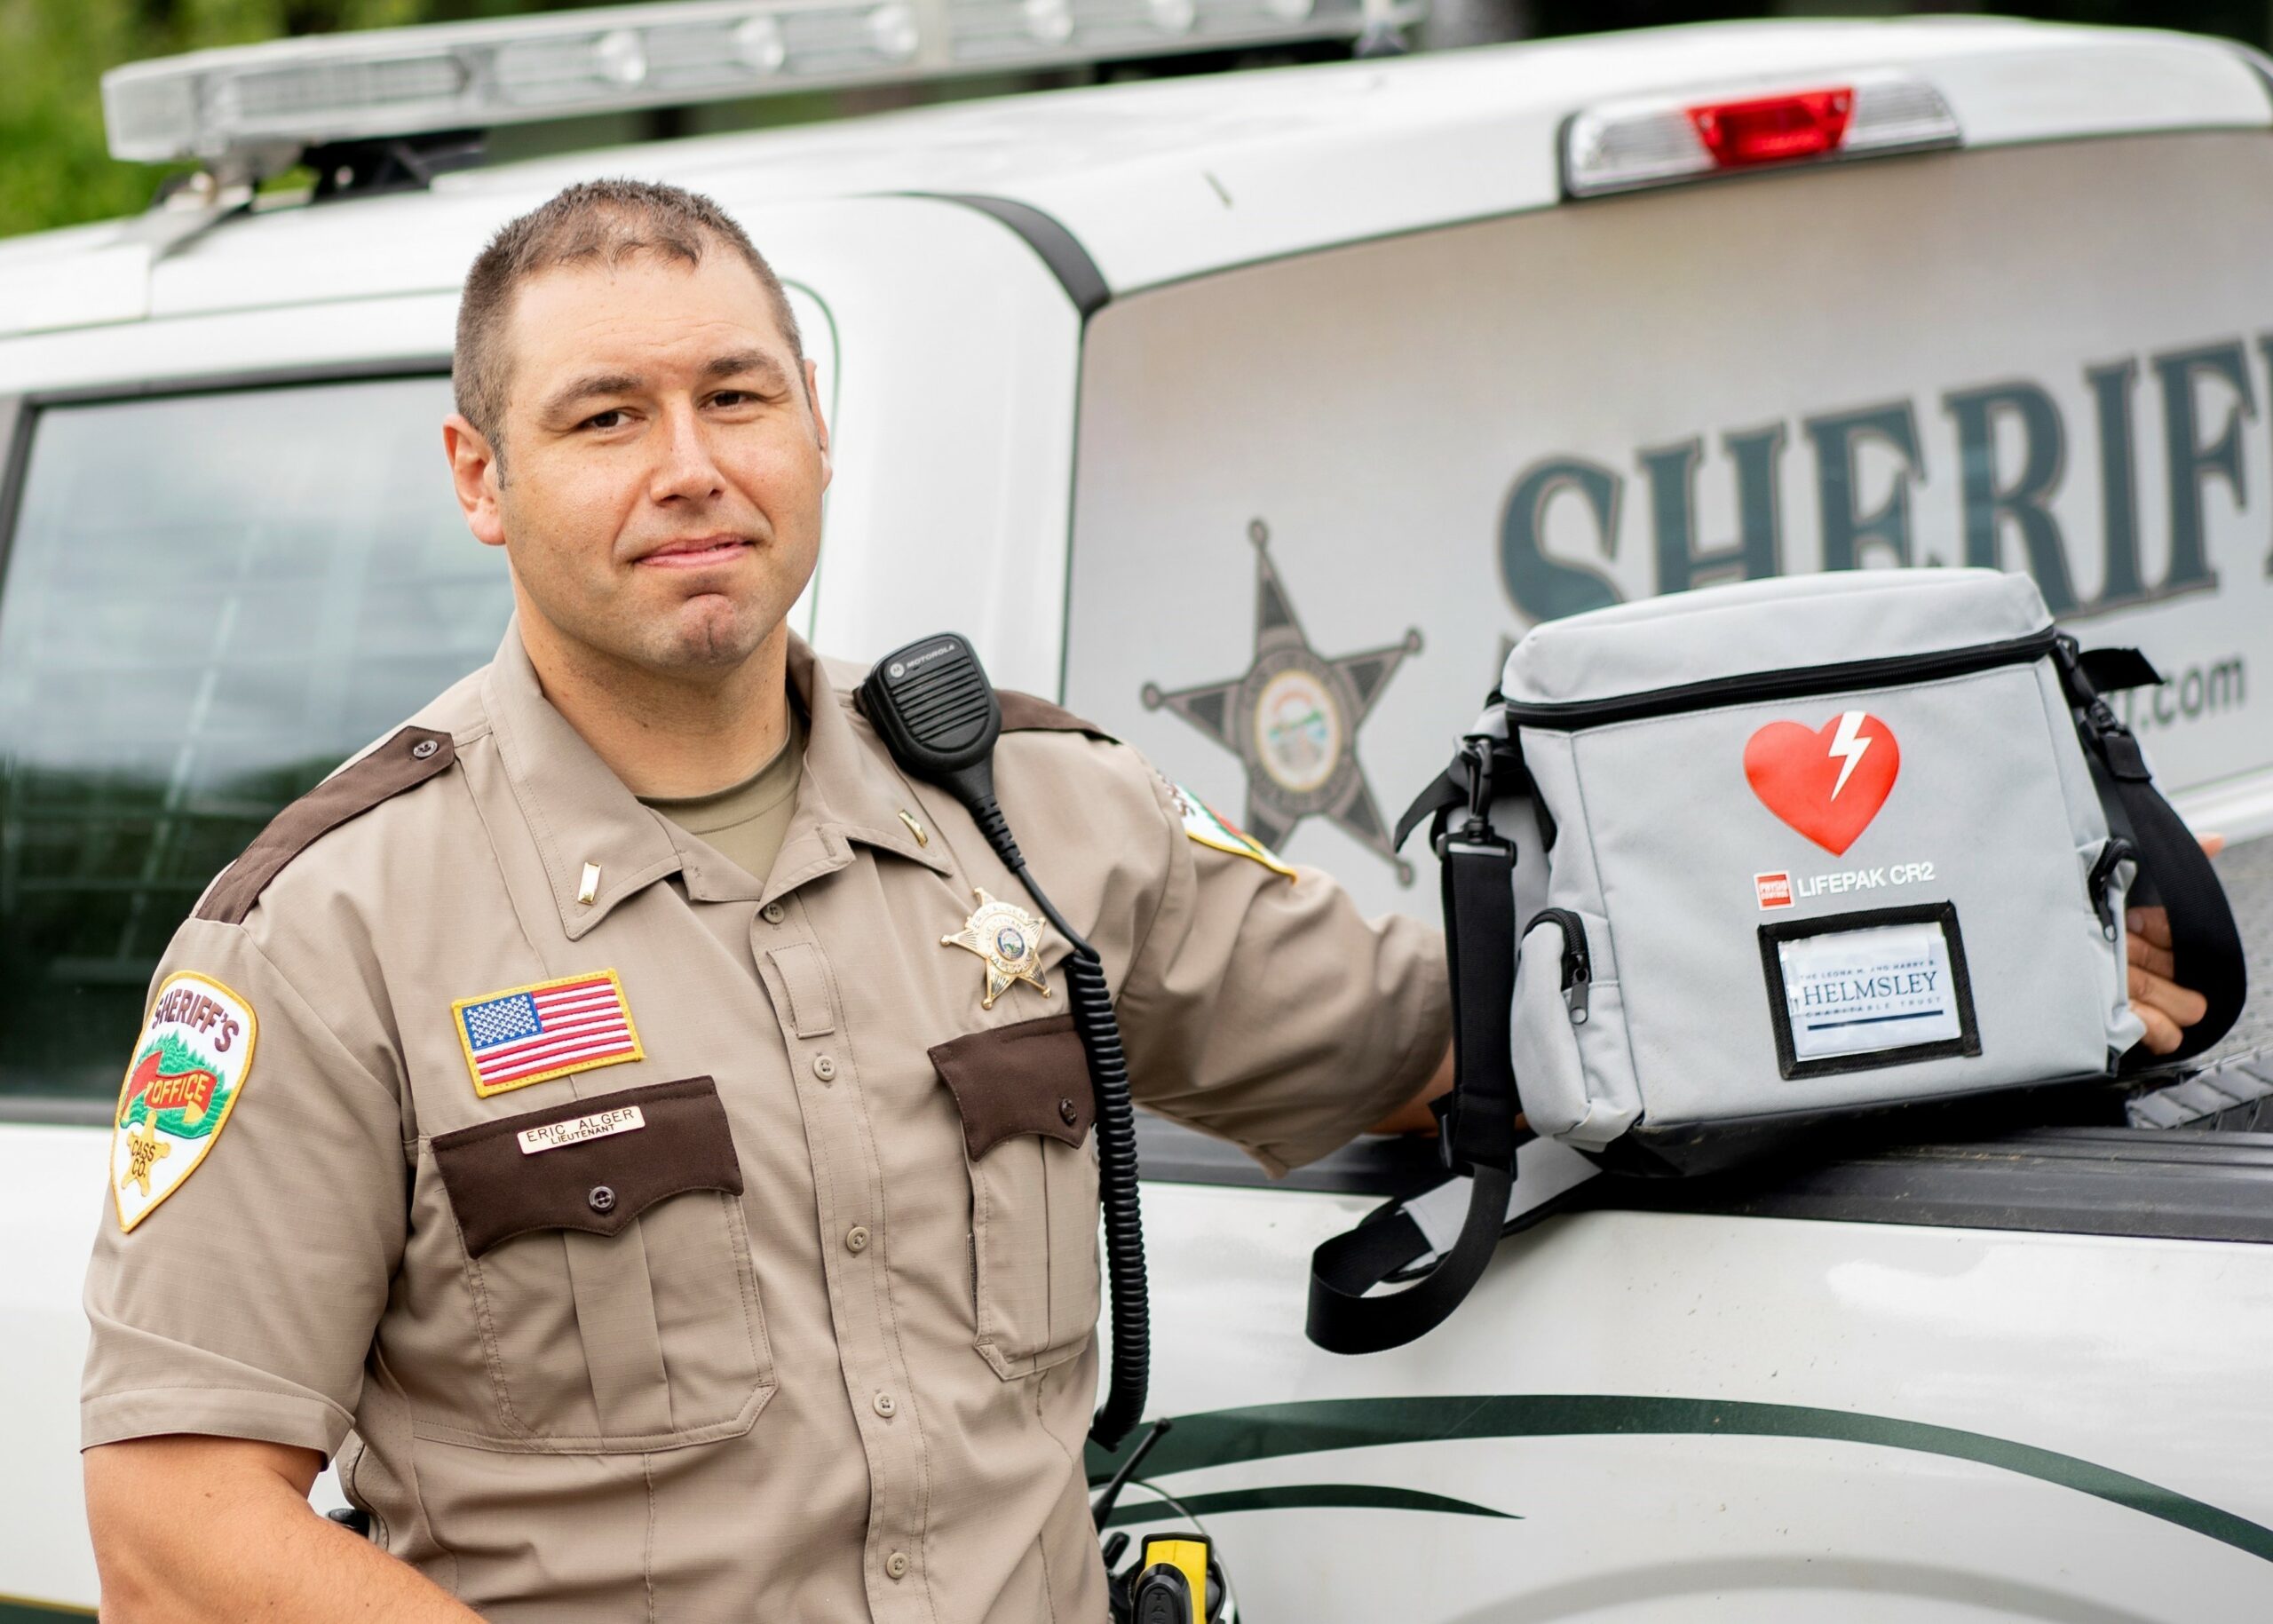 $6.9M Helmsley Charitable Trust Grant to Equip Nevada Law Enforcement Officers with Life-saving AEDs